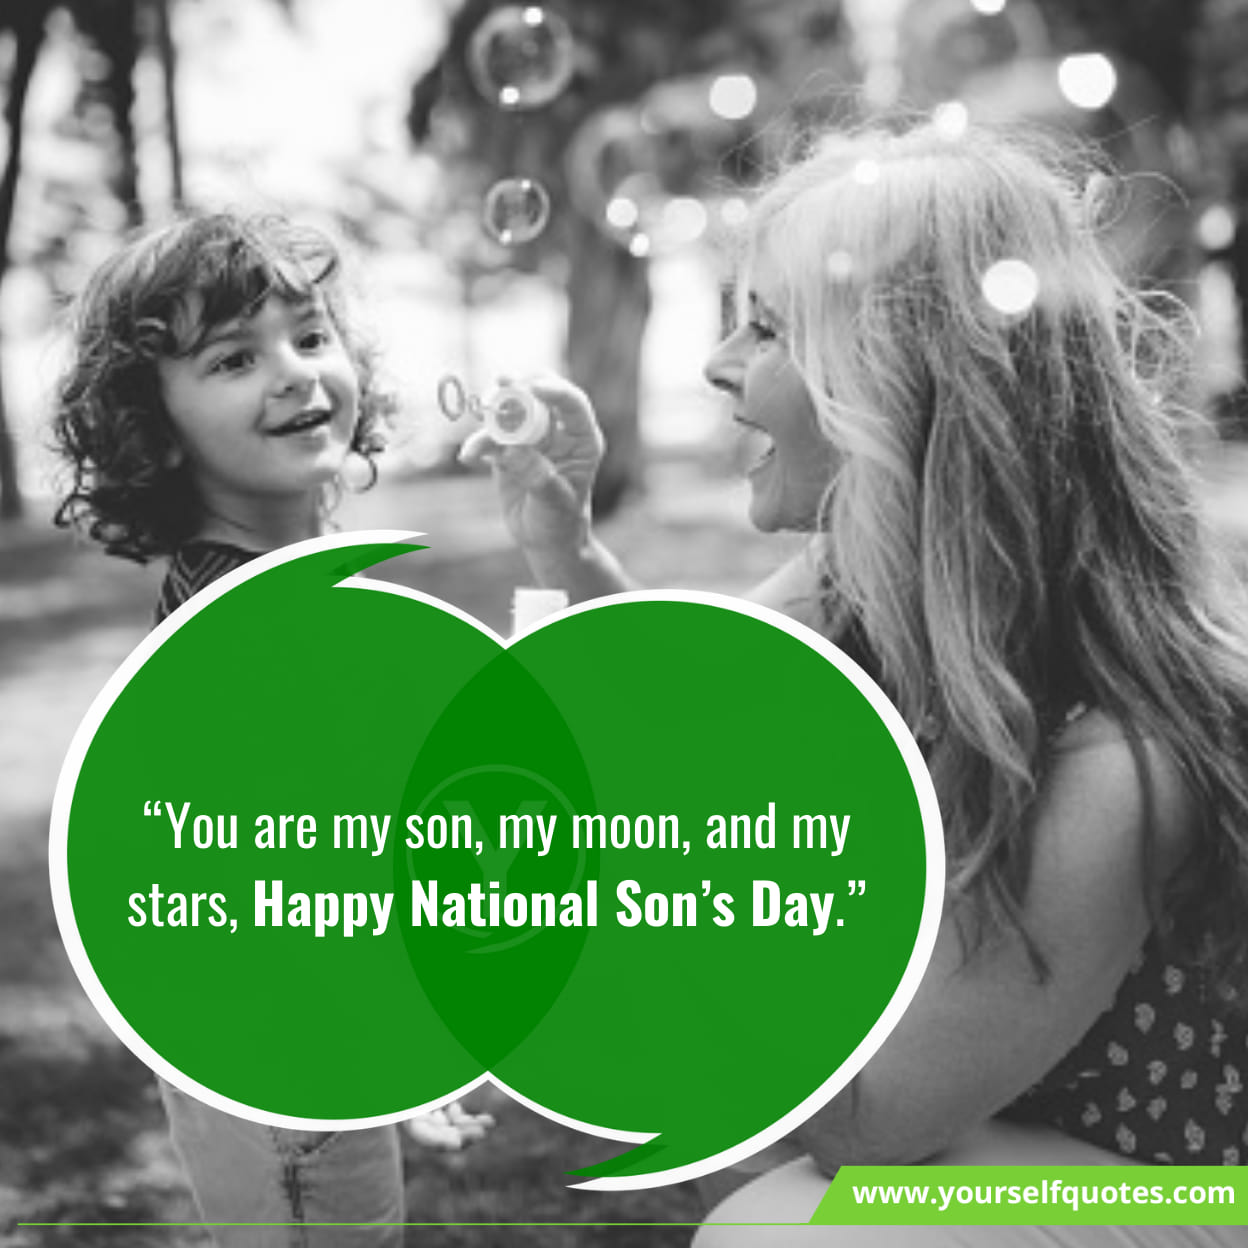 National Sons Day Sayings & Greetings